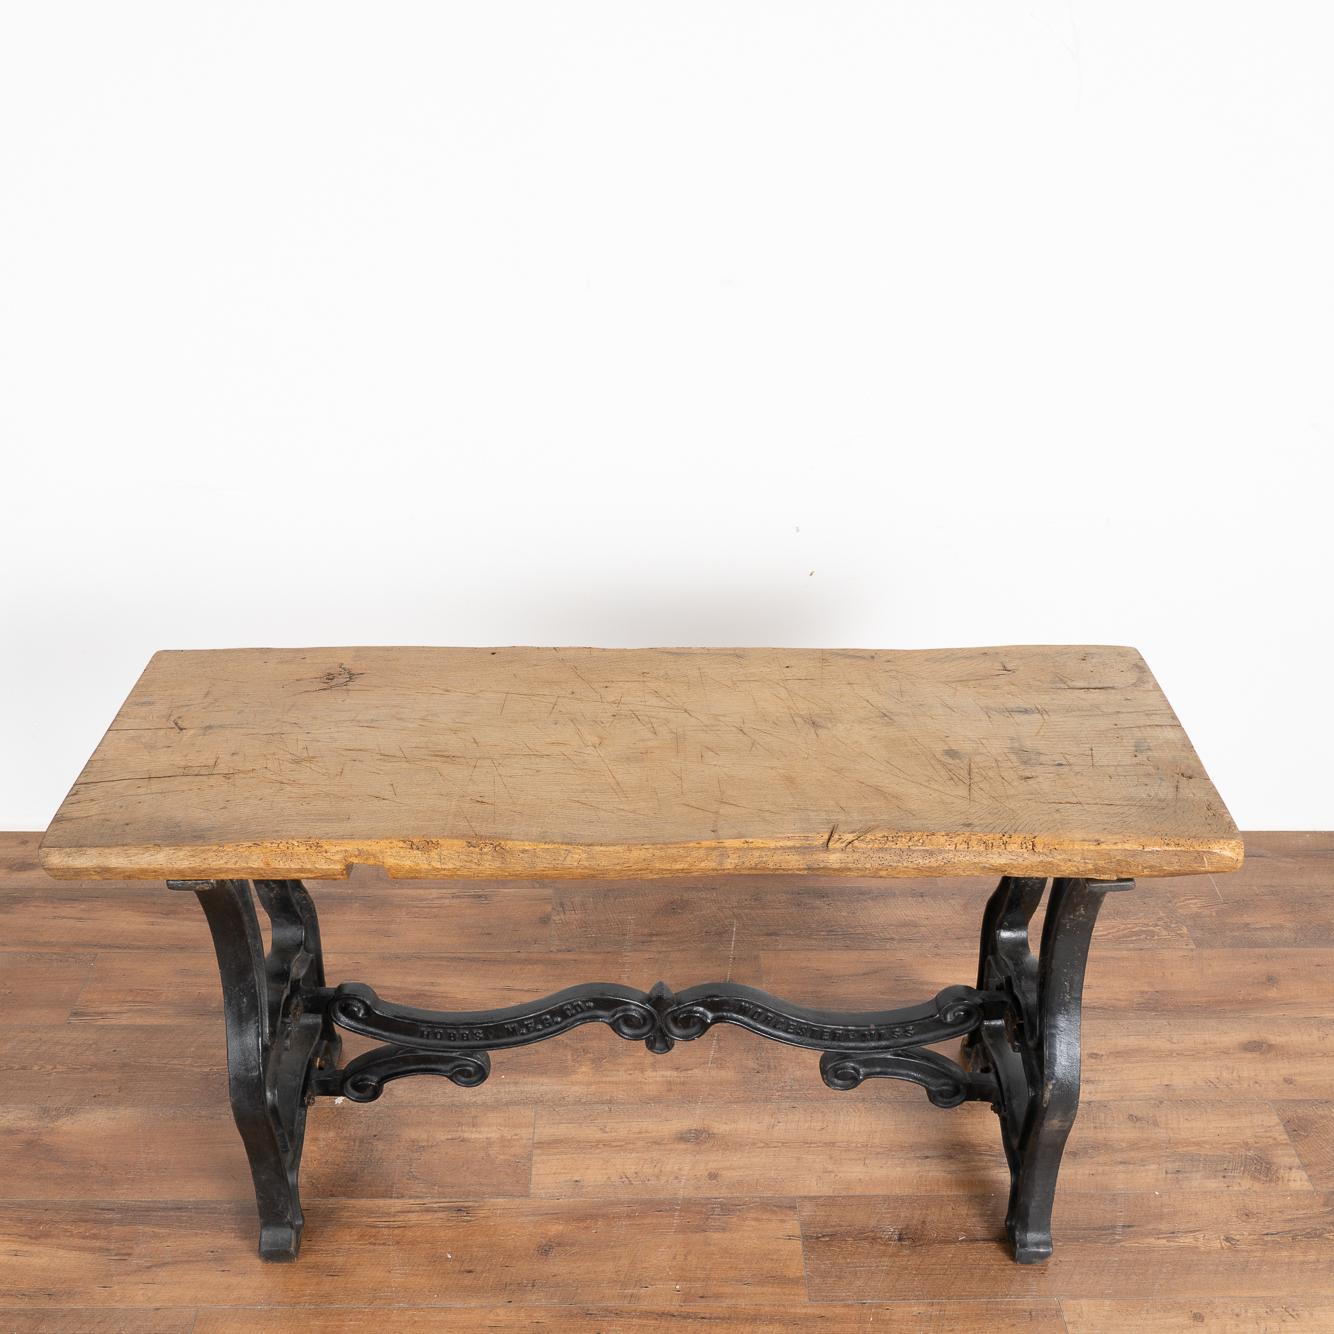 Rustic Vintage Console Table with Cast Iron Industrial Legs, circa 1900s In Good Condition For Sale In Round Top, TX